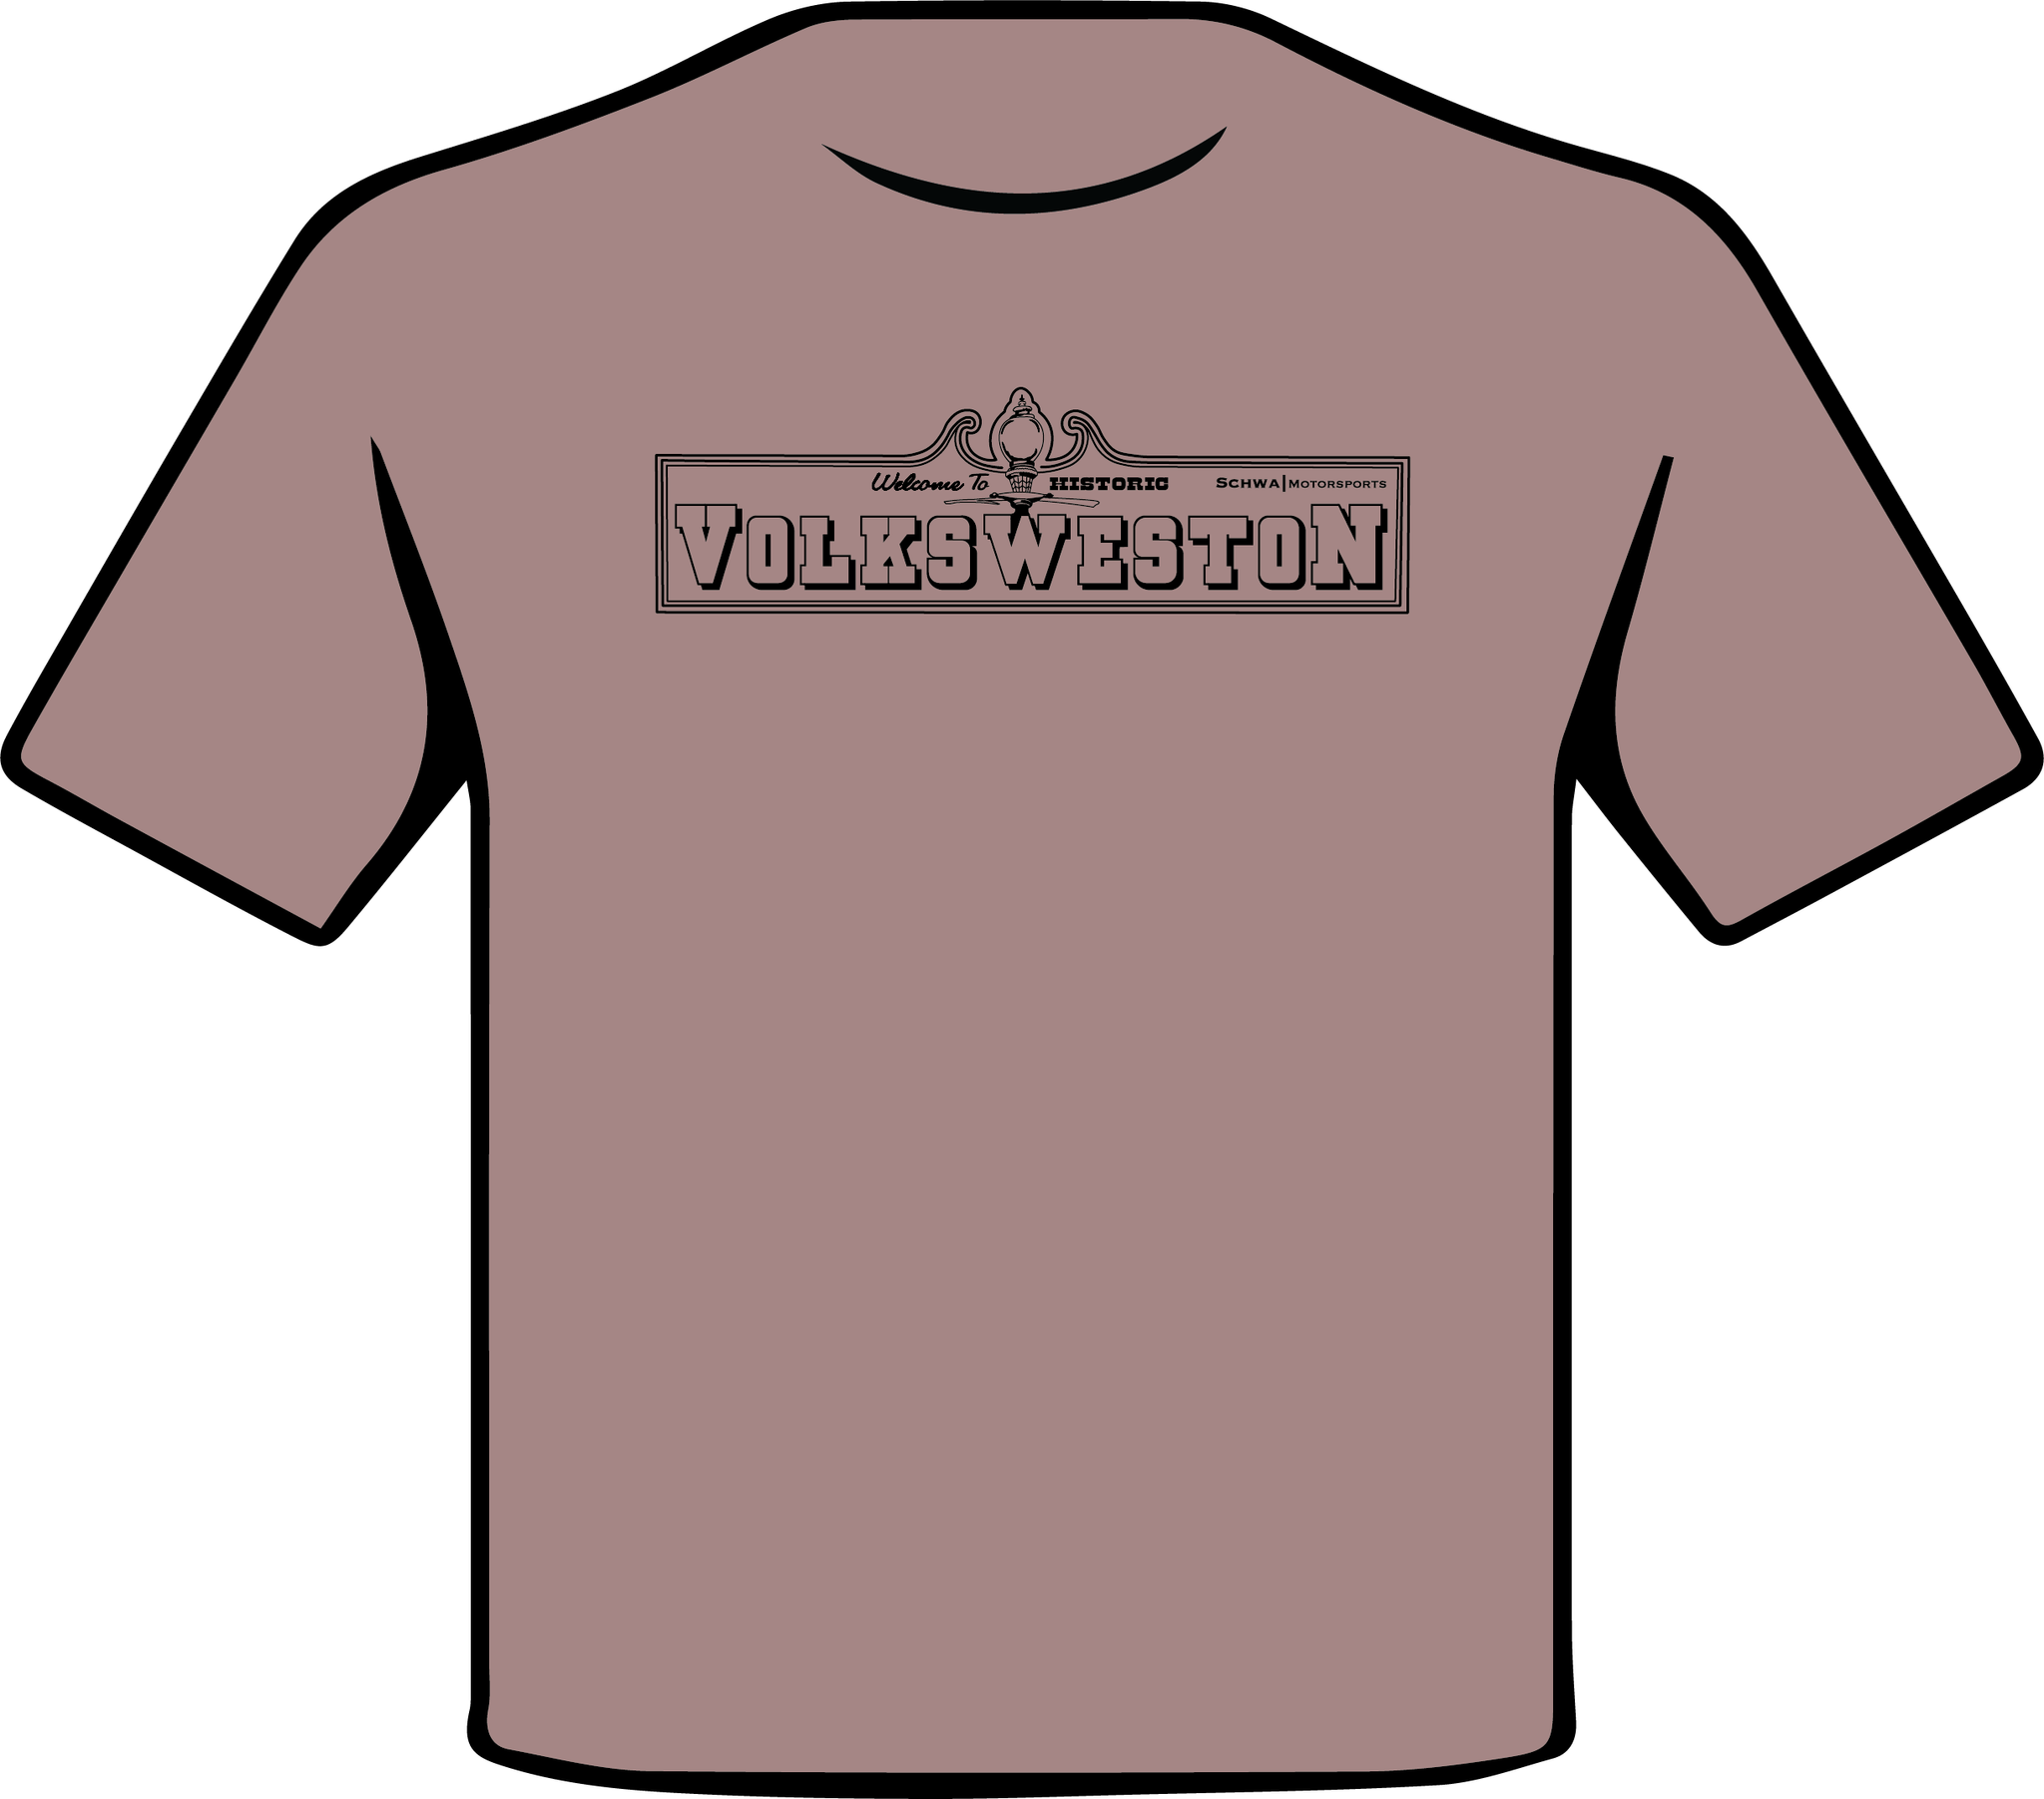 VolksWeston Show Welcome Sign Single Color T-Shirt